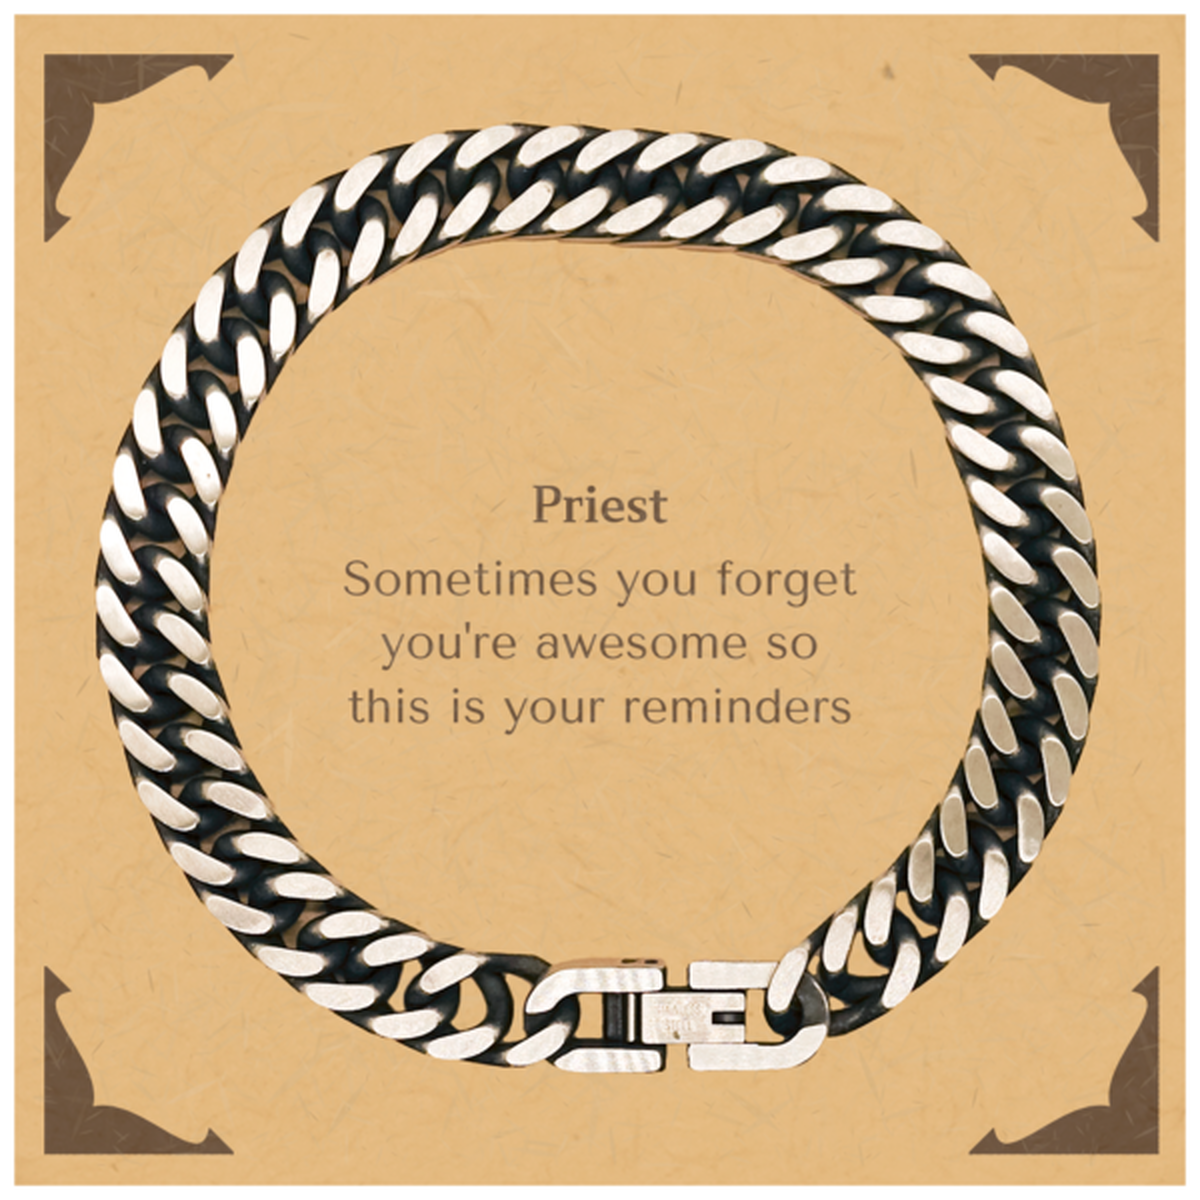 Sentimental Priest Cuban Link Chain Bracelet, Priest Sometimes you forget you're awesome so this is your reminders, Graduation Christmas Birthday Gifts for Priest, Men, Women, Coworkers